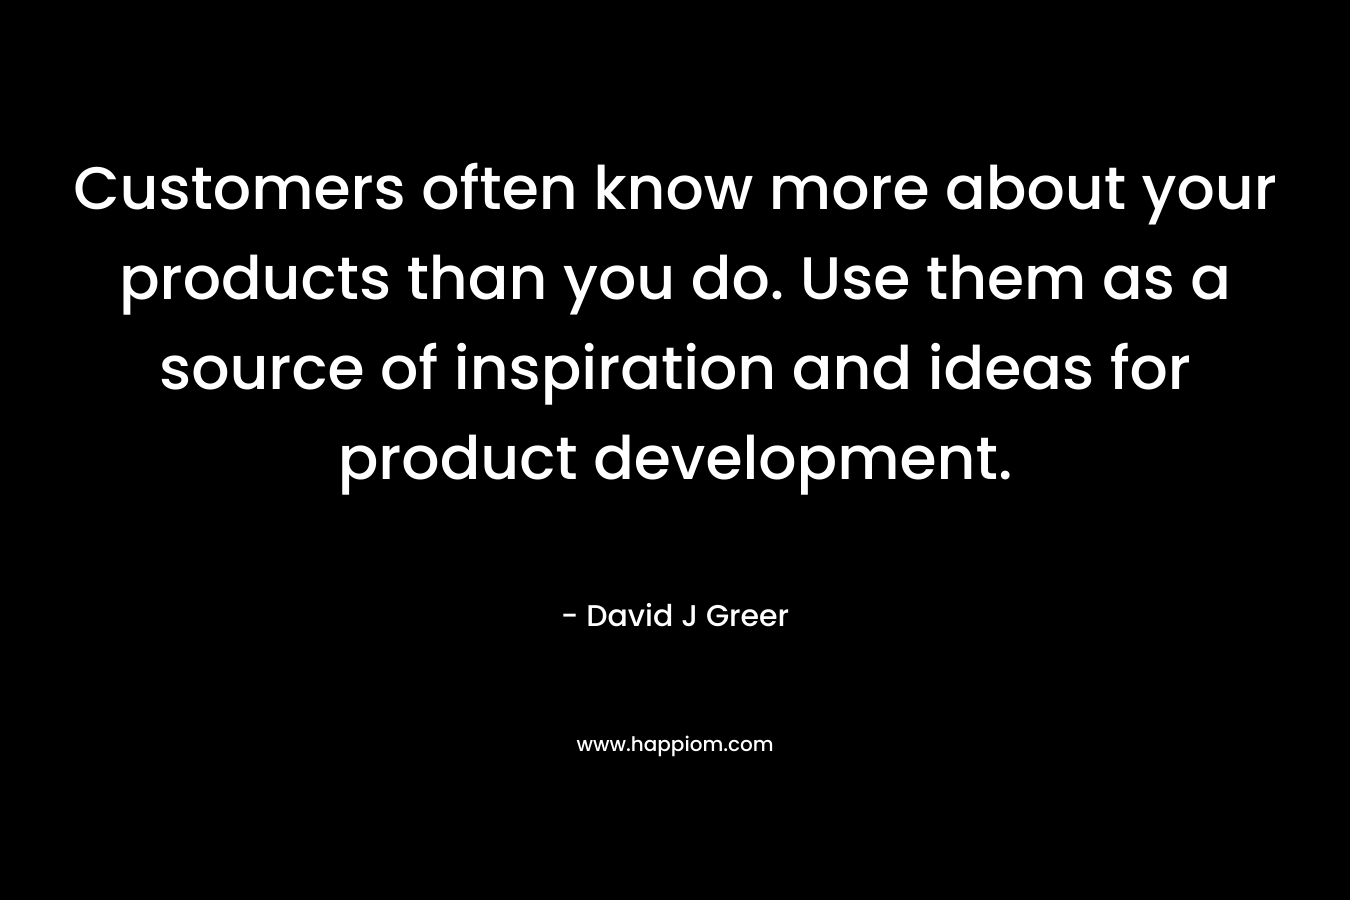 Customers often know more about your products than you do. Use them as a source of inspiration and ideas for product development.